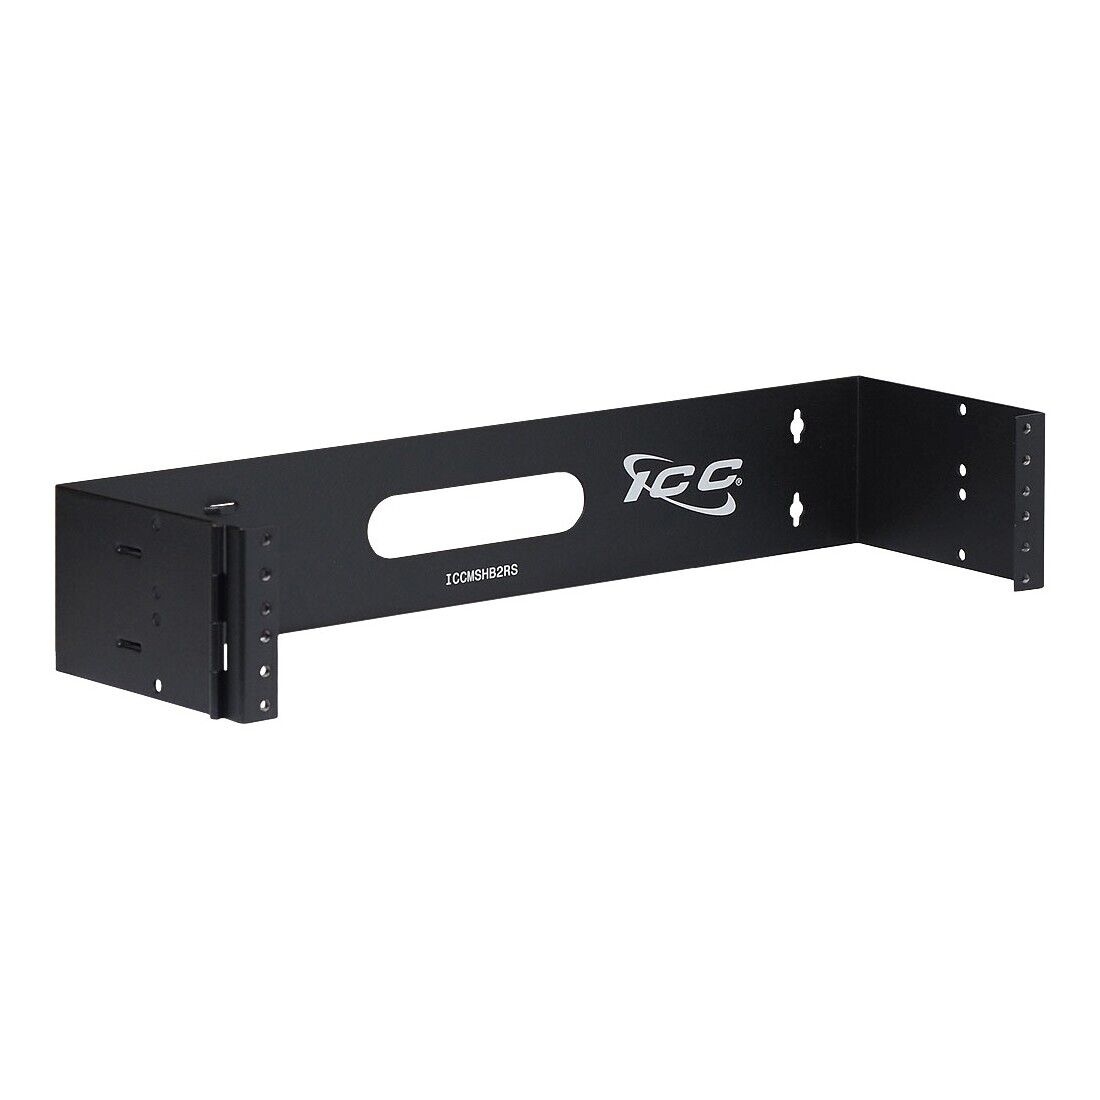 ICC ICCMSHB2RS Mounting Bracket for Rack